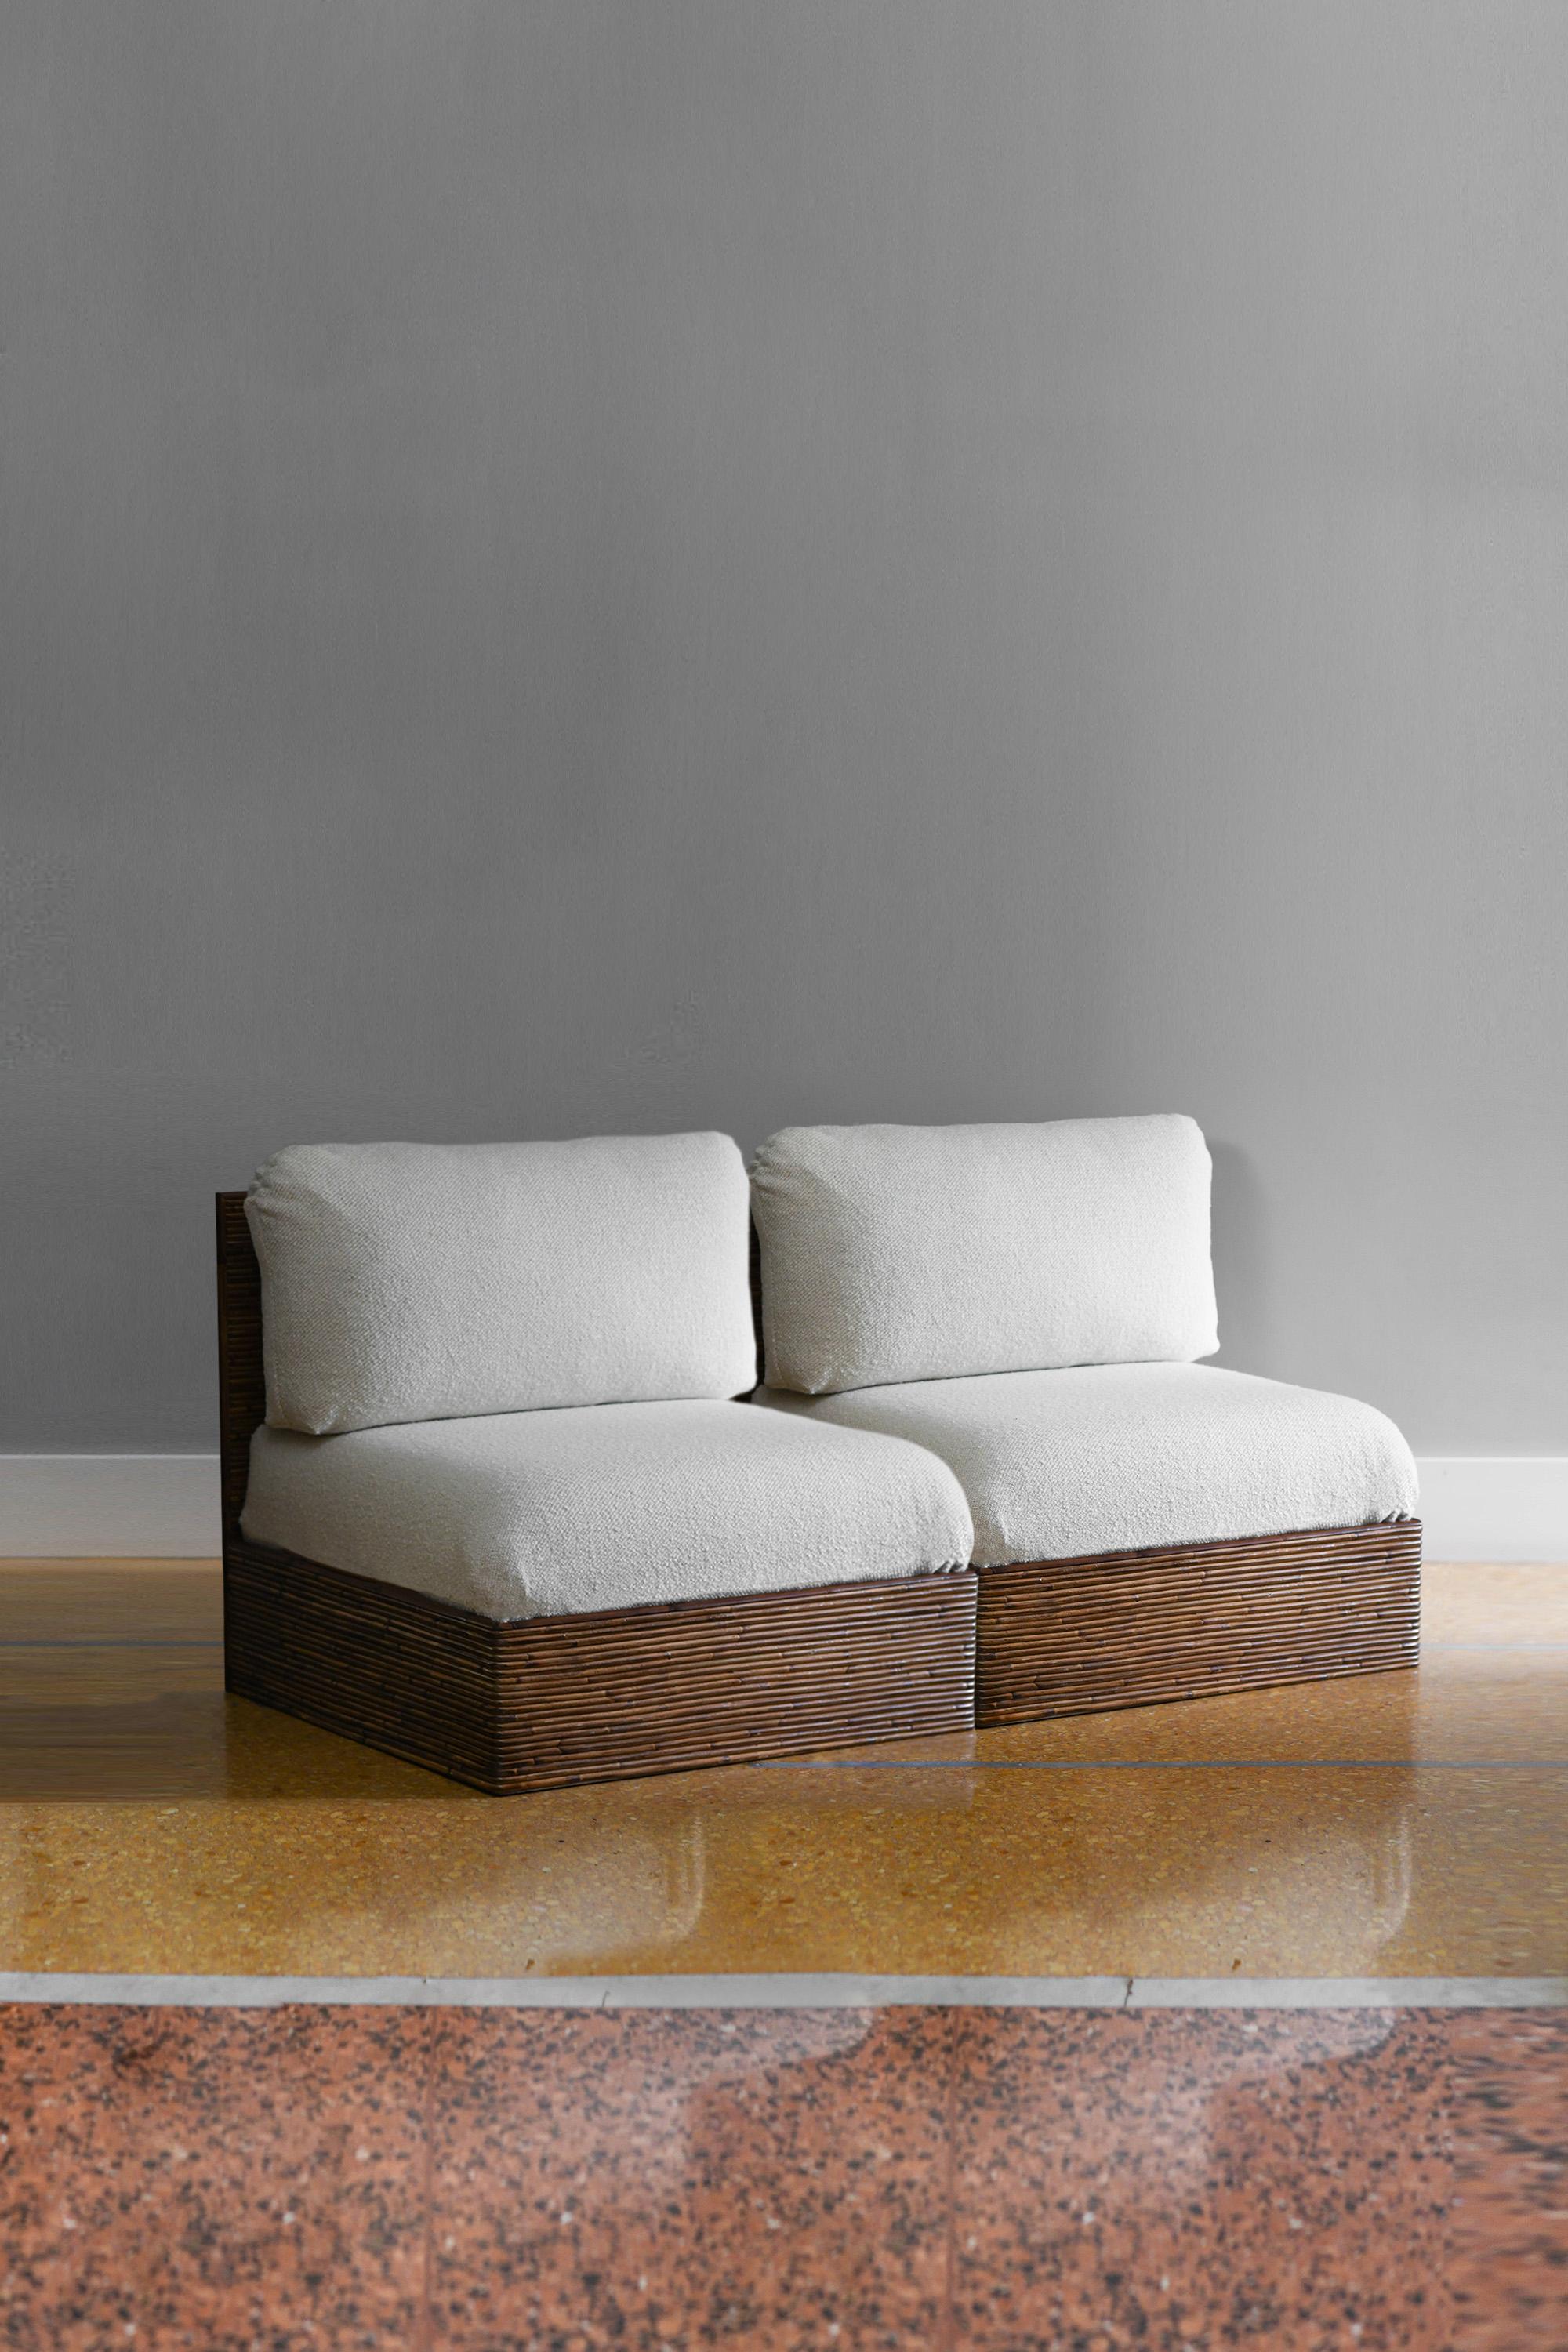 Modular bamboo sofa Molto Editions complete with cushions in Dedar fabric
Single module dimensions: 80 W x 80 H x 80 D cm
Materials: bamboo, Dedar fabric, wood.
Price is for single module
Production: Italian artisan production.